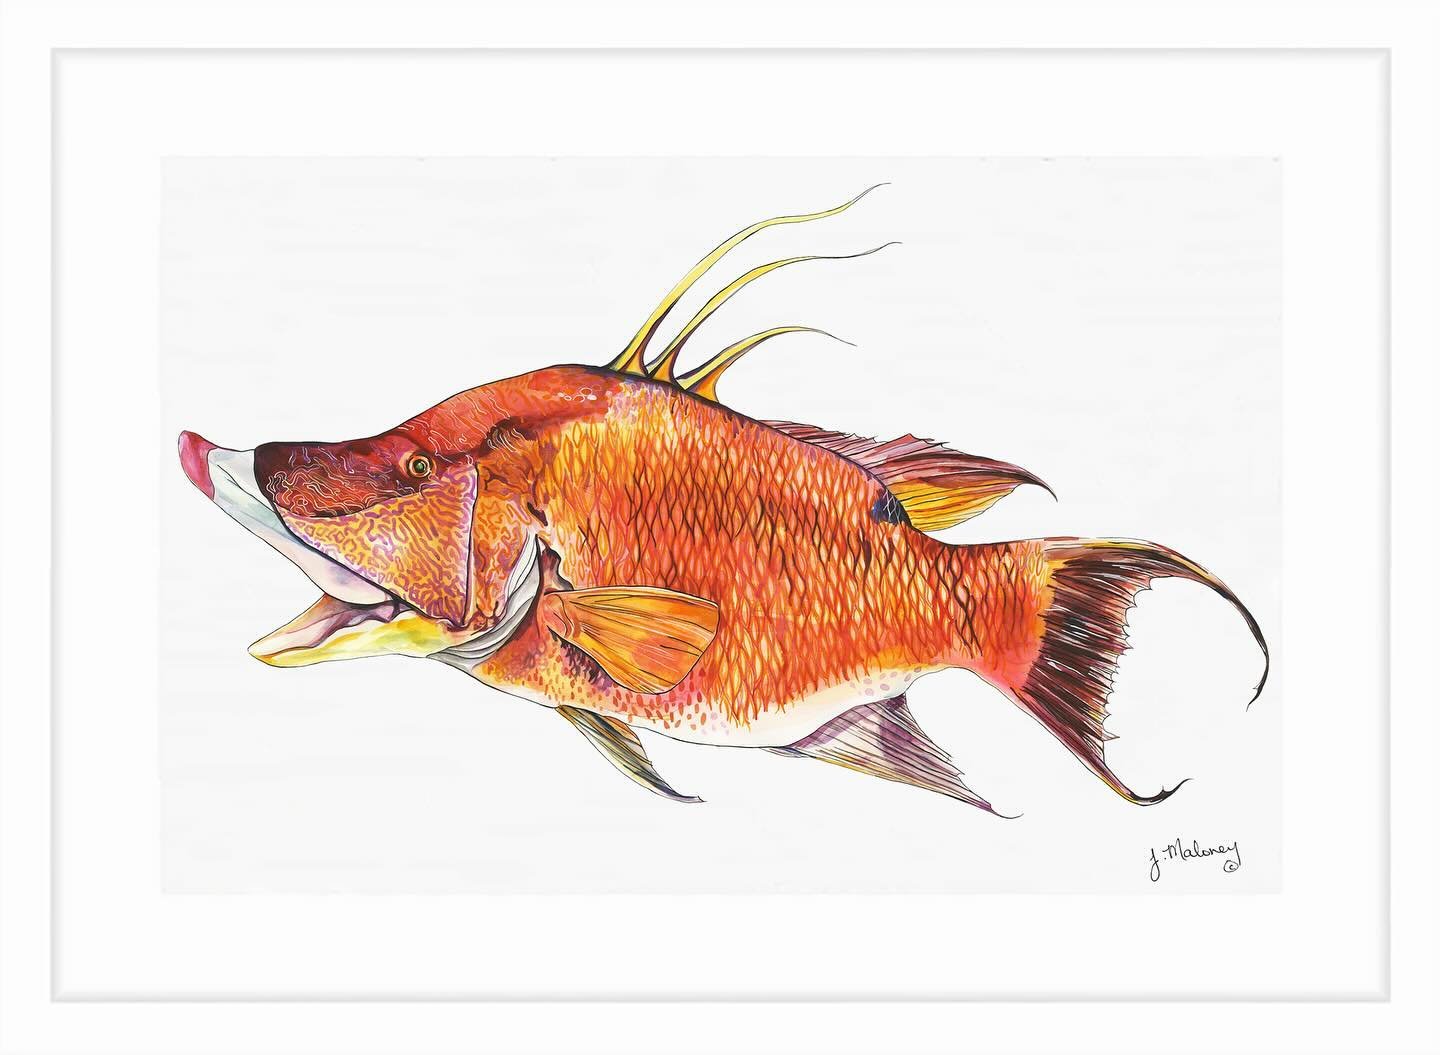 It&rsquo;s READY. My newest watercolor fishy is complete! I have &ldquo;Hogfish&rdquo; reproductions available in my Print Shop :  jackiemaloney.com

@hhiseafoodfest